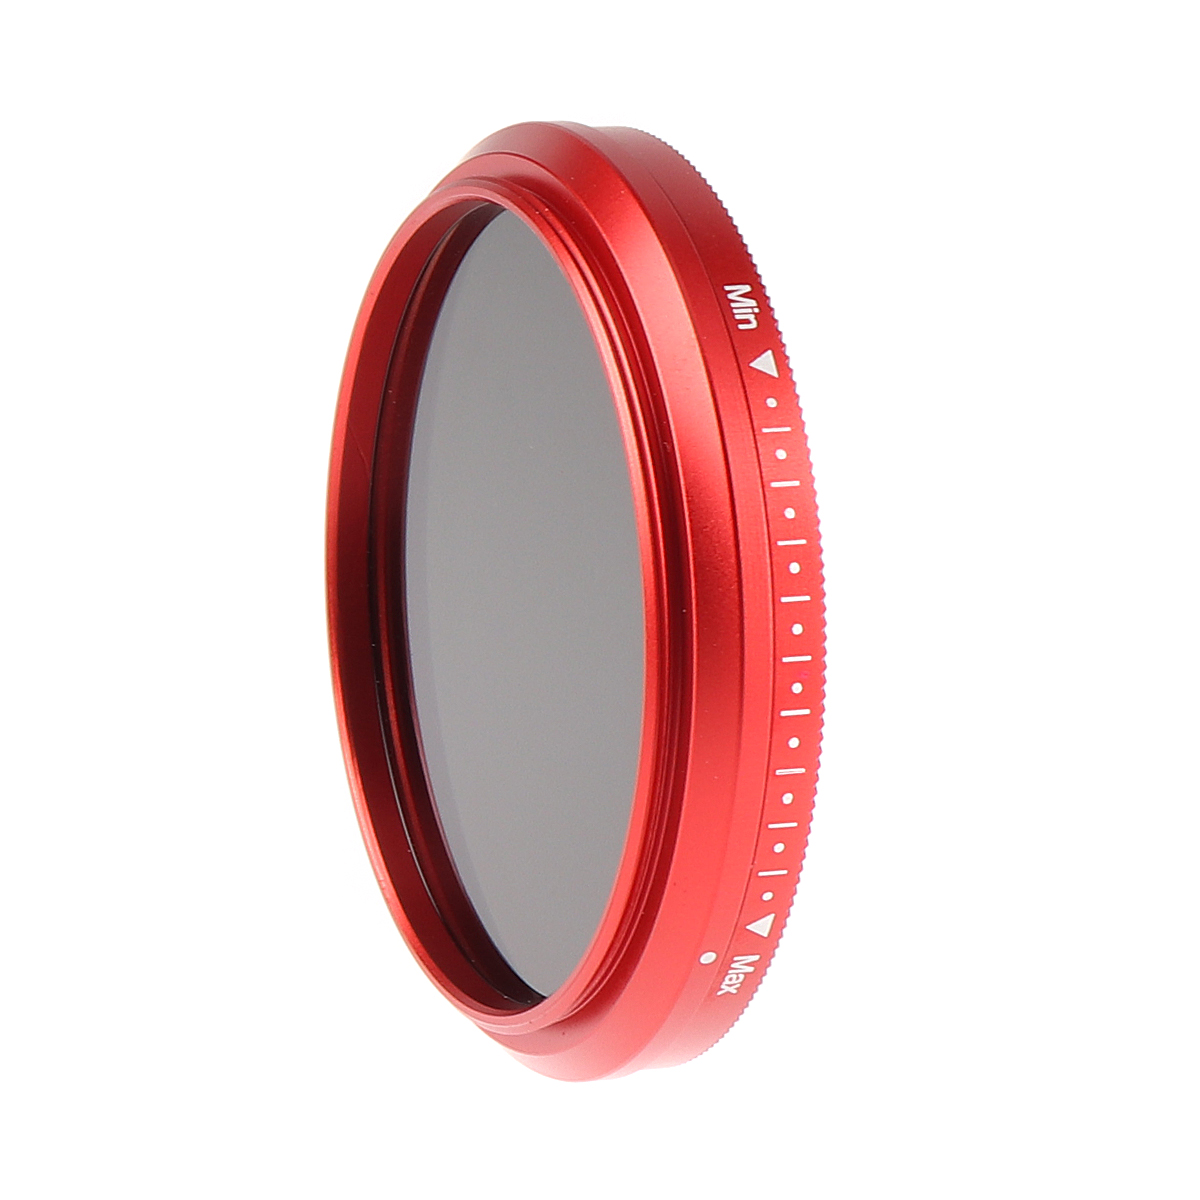 FOTGA PLANA Fader Variable Nd Filtro Ajustable ND2 to ND400 49mm Neutral 